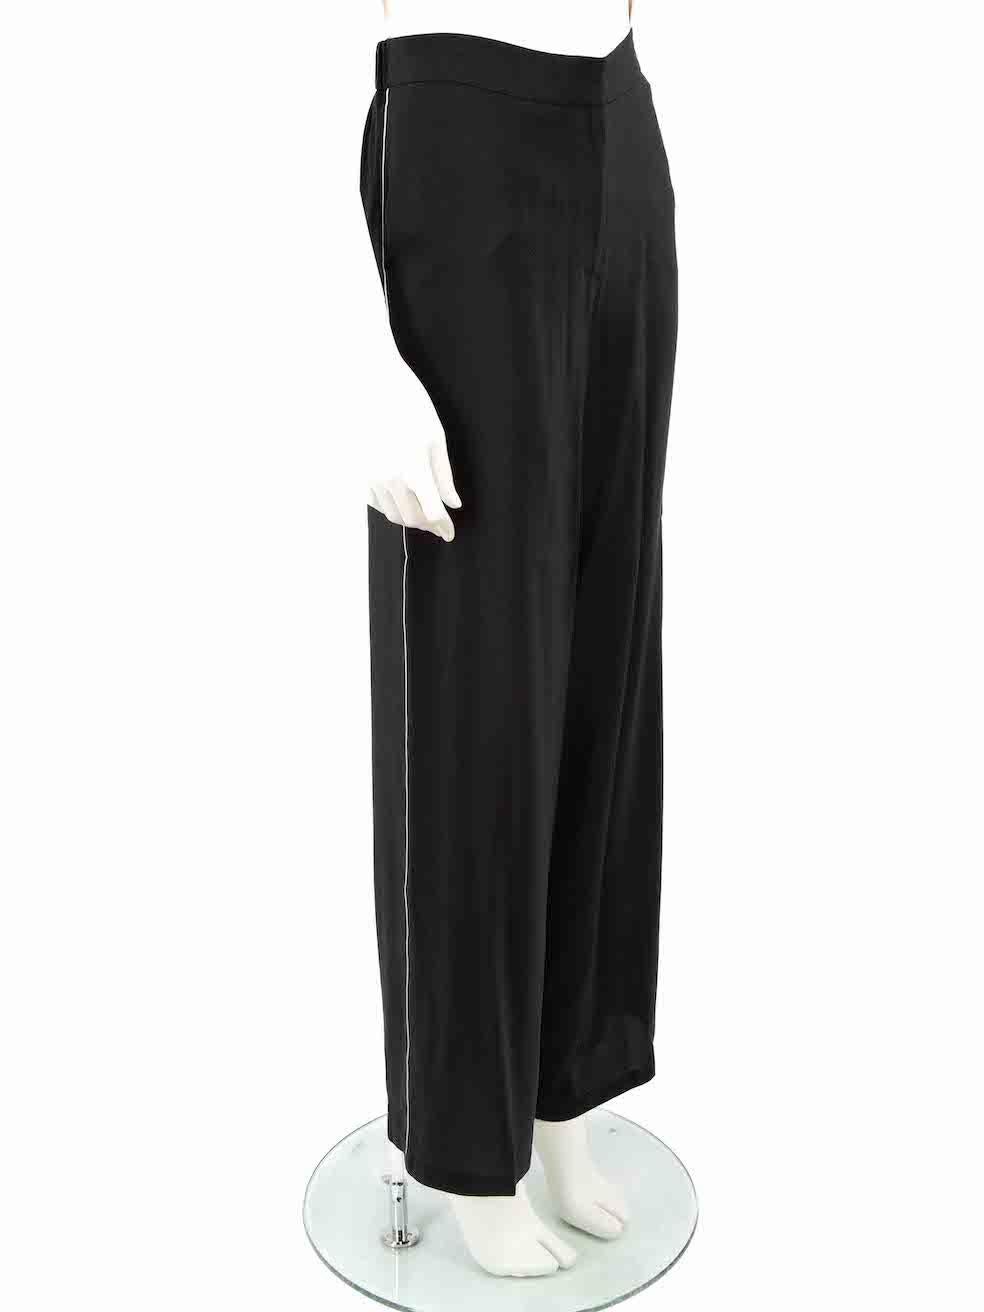 CONDITION is Very good. Minimal wear to trousers is evident. Minimal wear to the front fastening as this has been re-attached with a different colour thread on this used Carolina Herrera designer resale item.
 
 Details
 Black
 Silk
 Trousers
 Wide